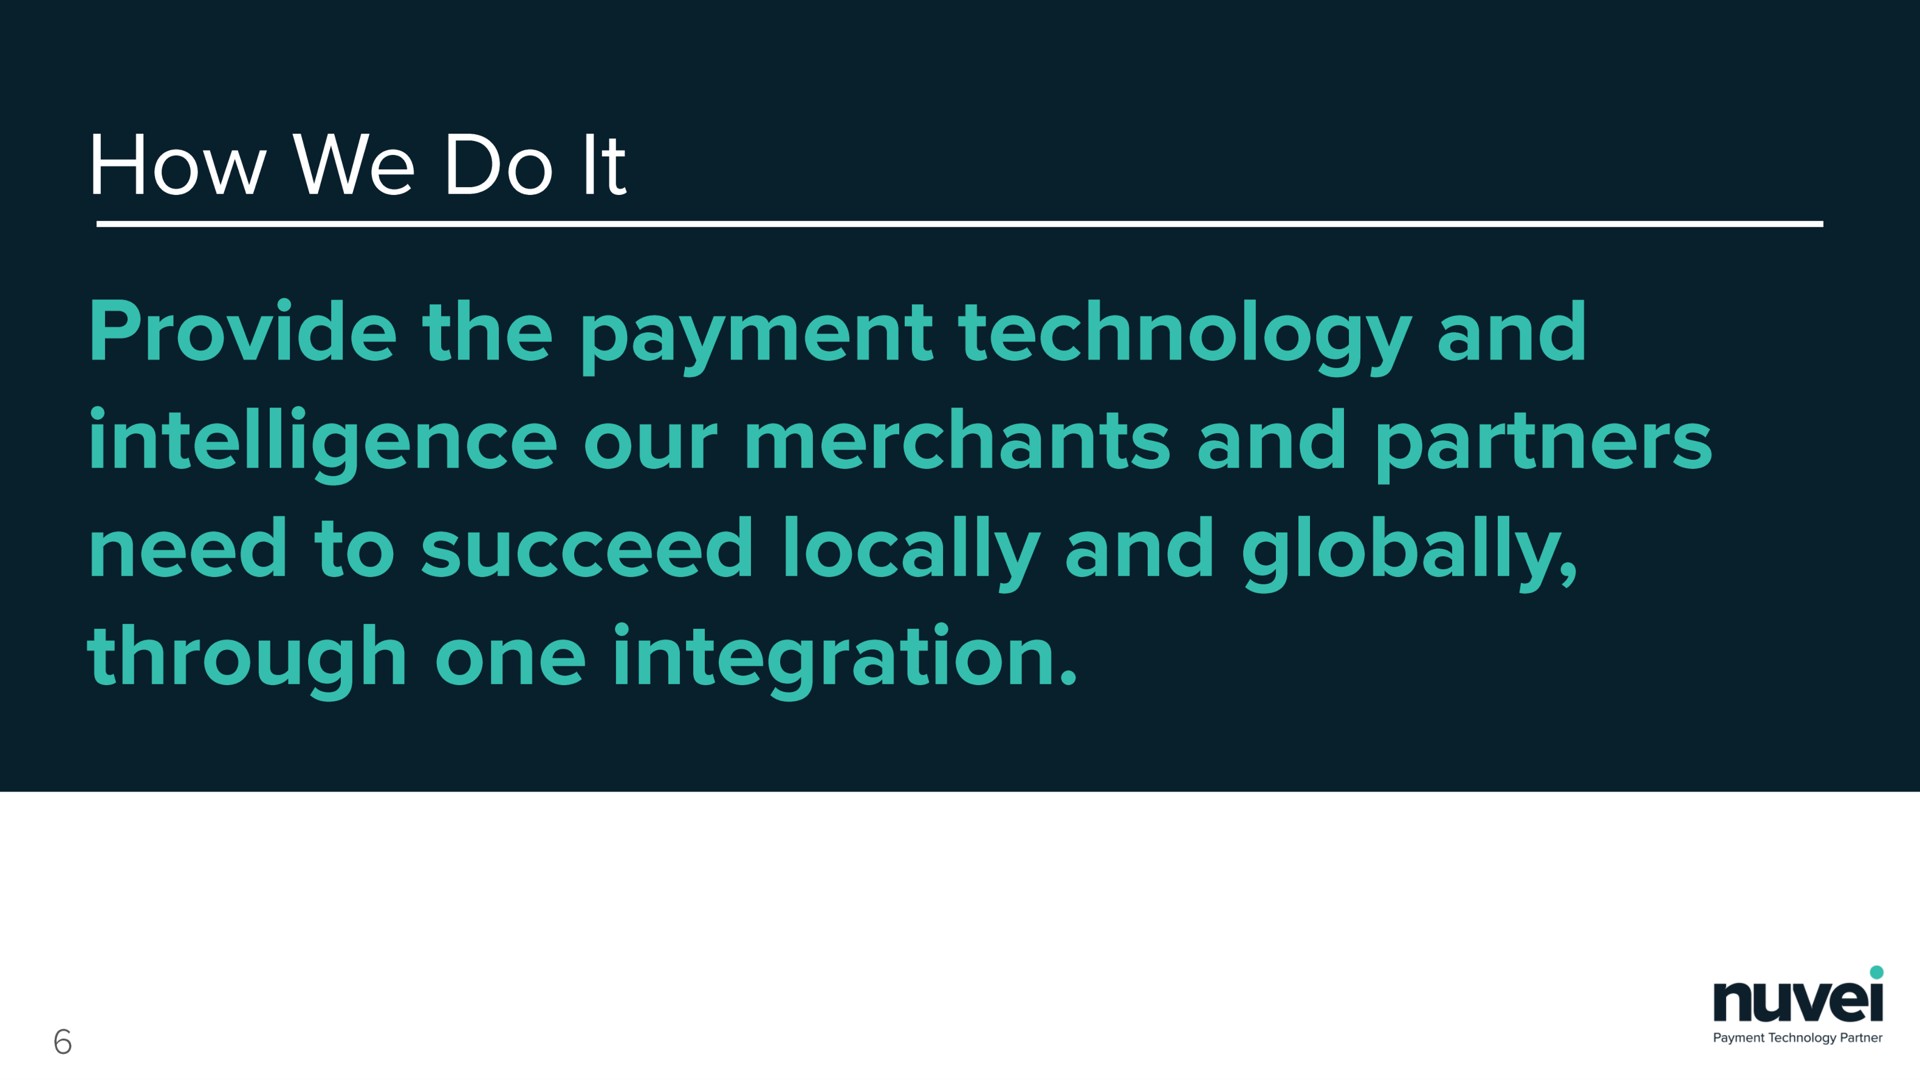 how we do it provide the payment technology and intelligence our merchants and partners need to succeed locally and globally through one integration | Nuvei